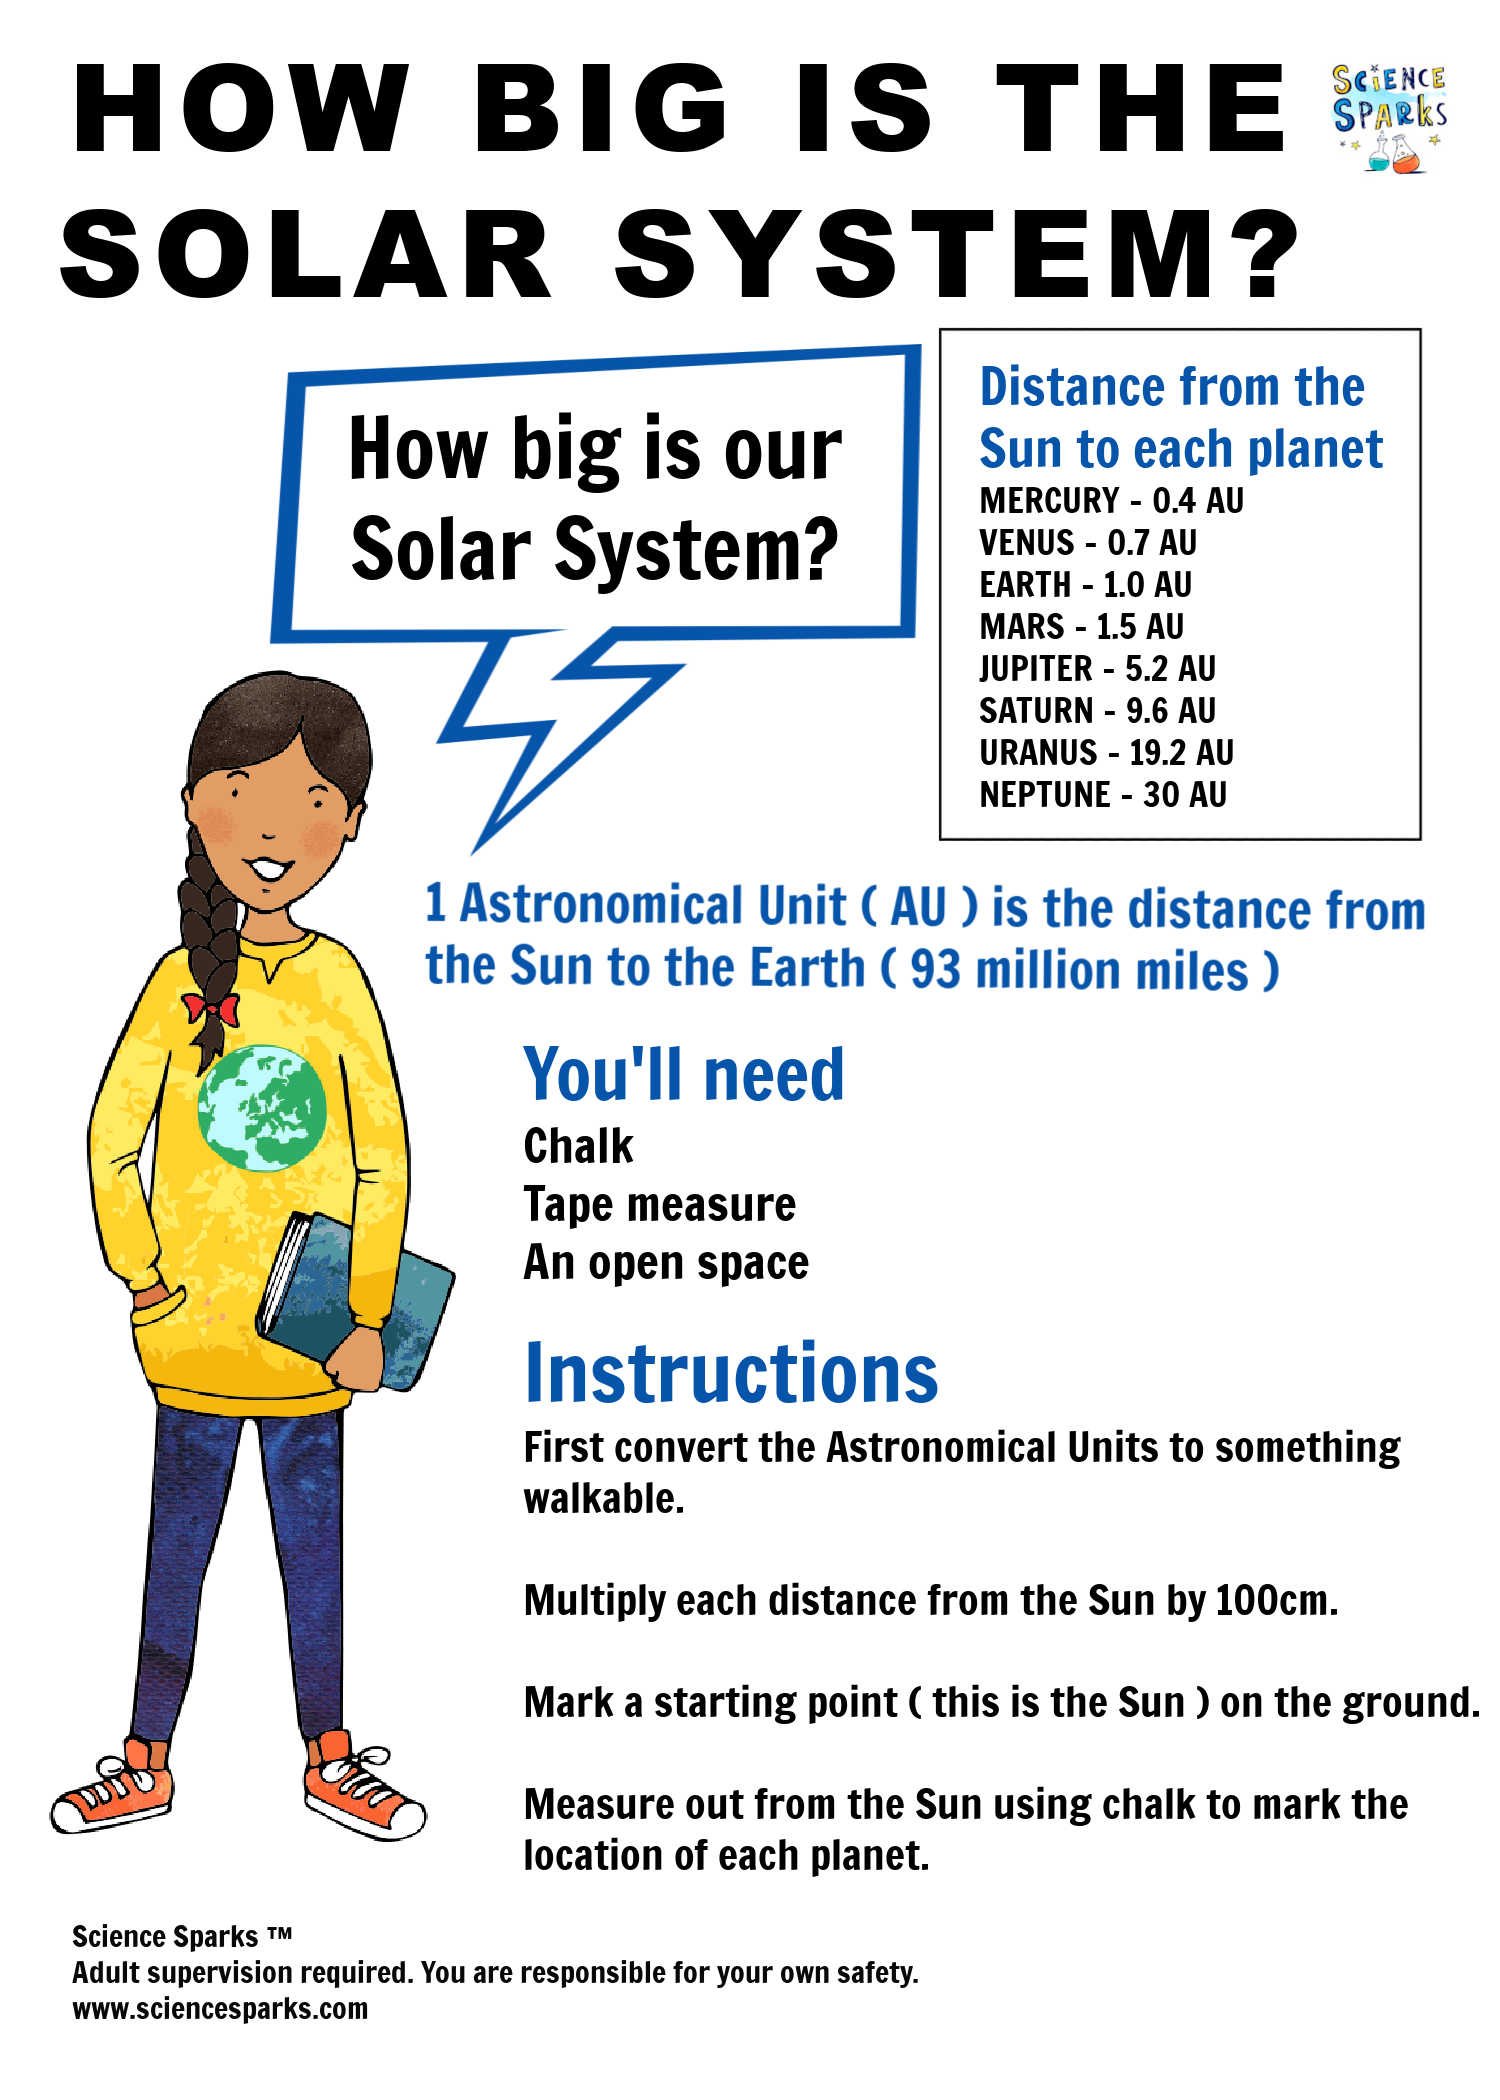 Science questions - how big is the solar system?